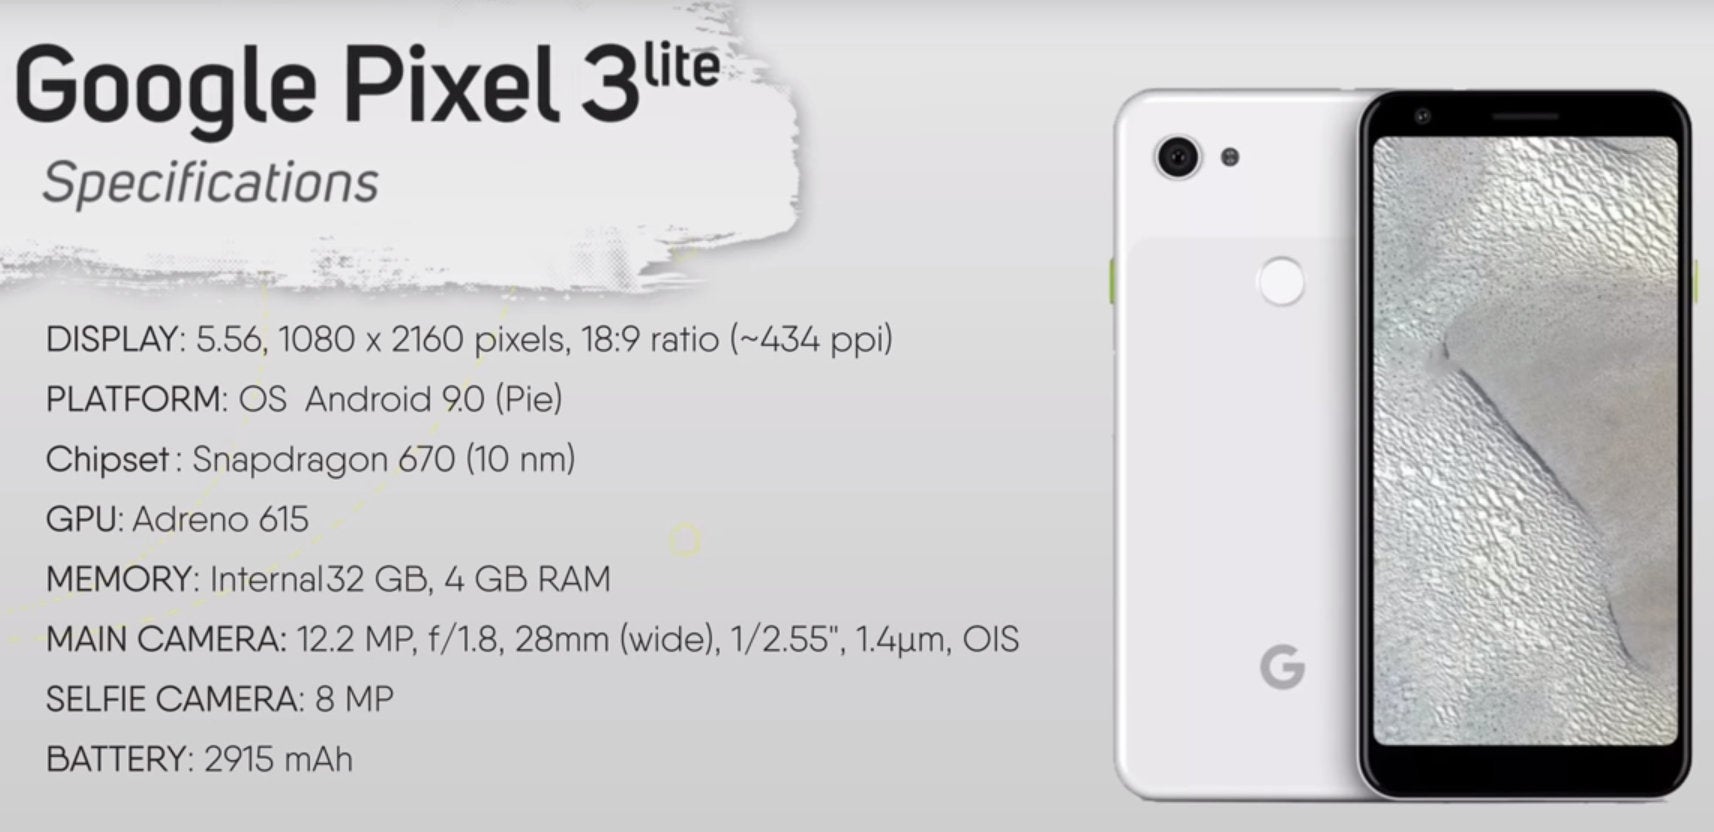 Google Pixel 3 Lite gets reviewed on video ahead of official announcement